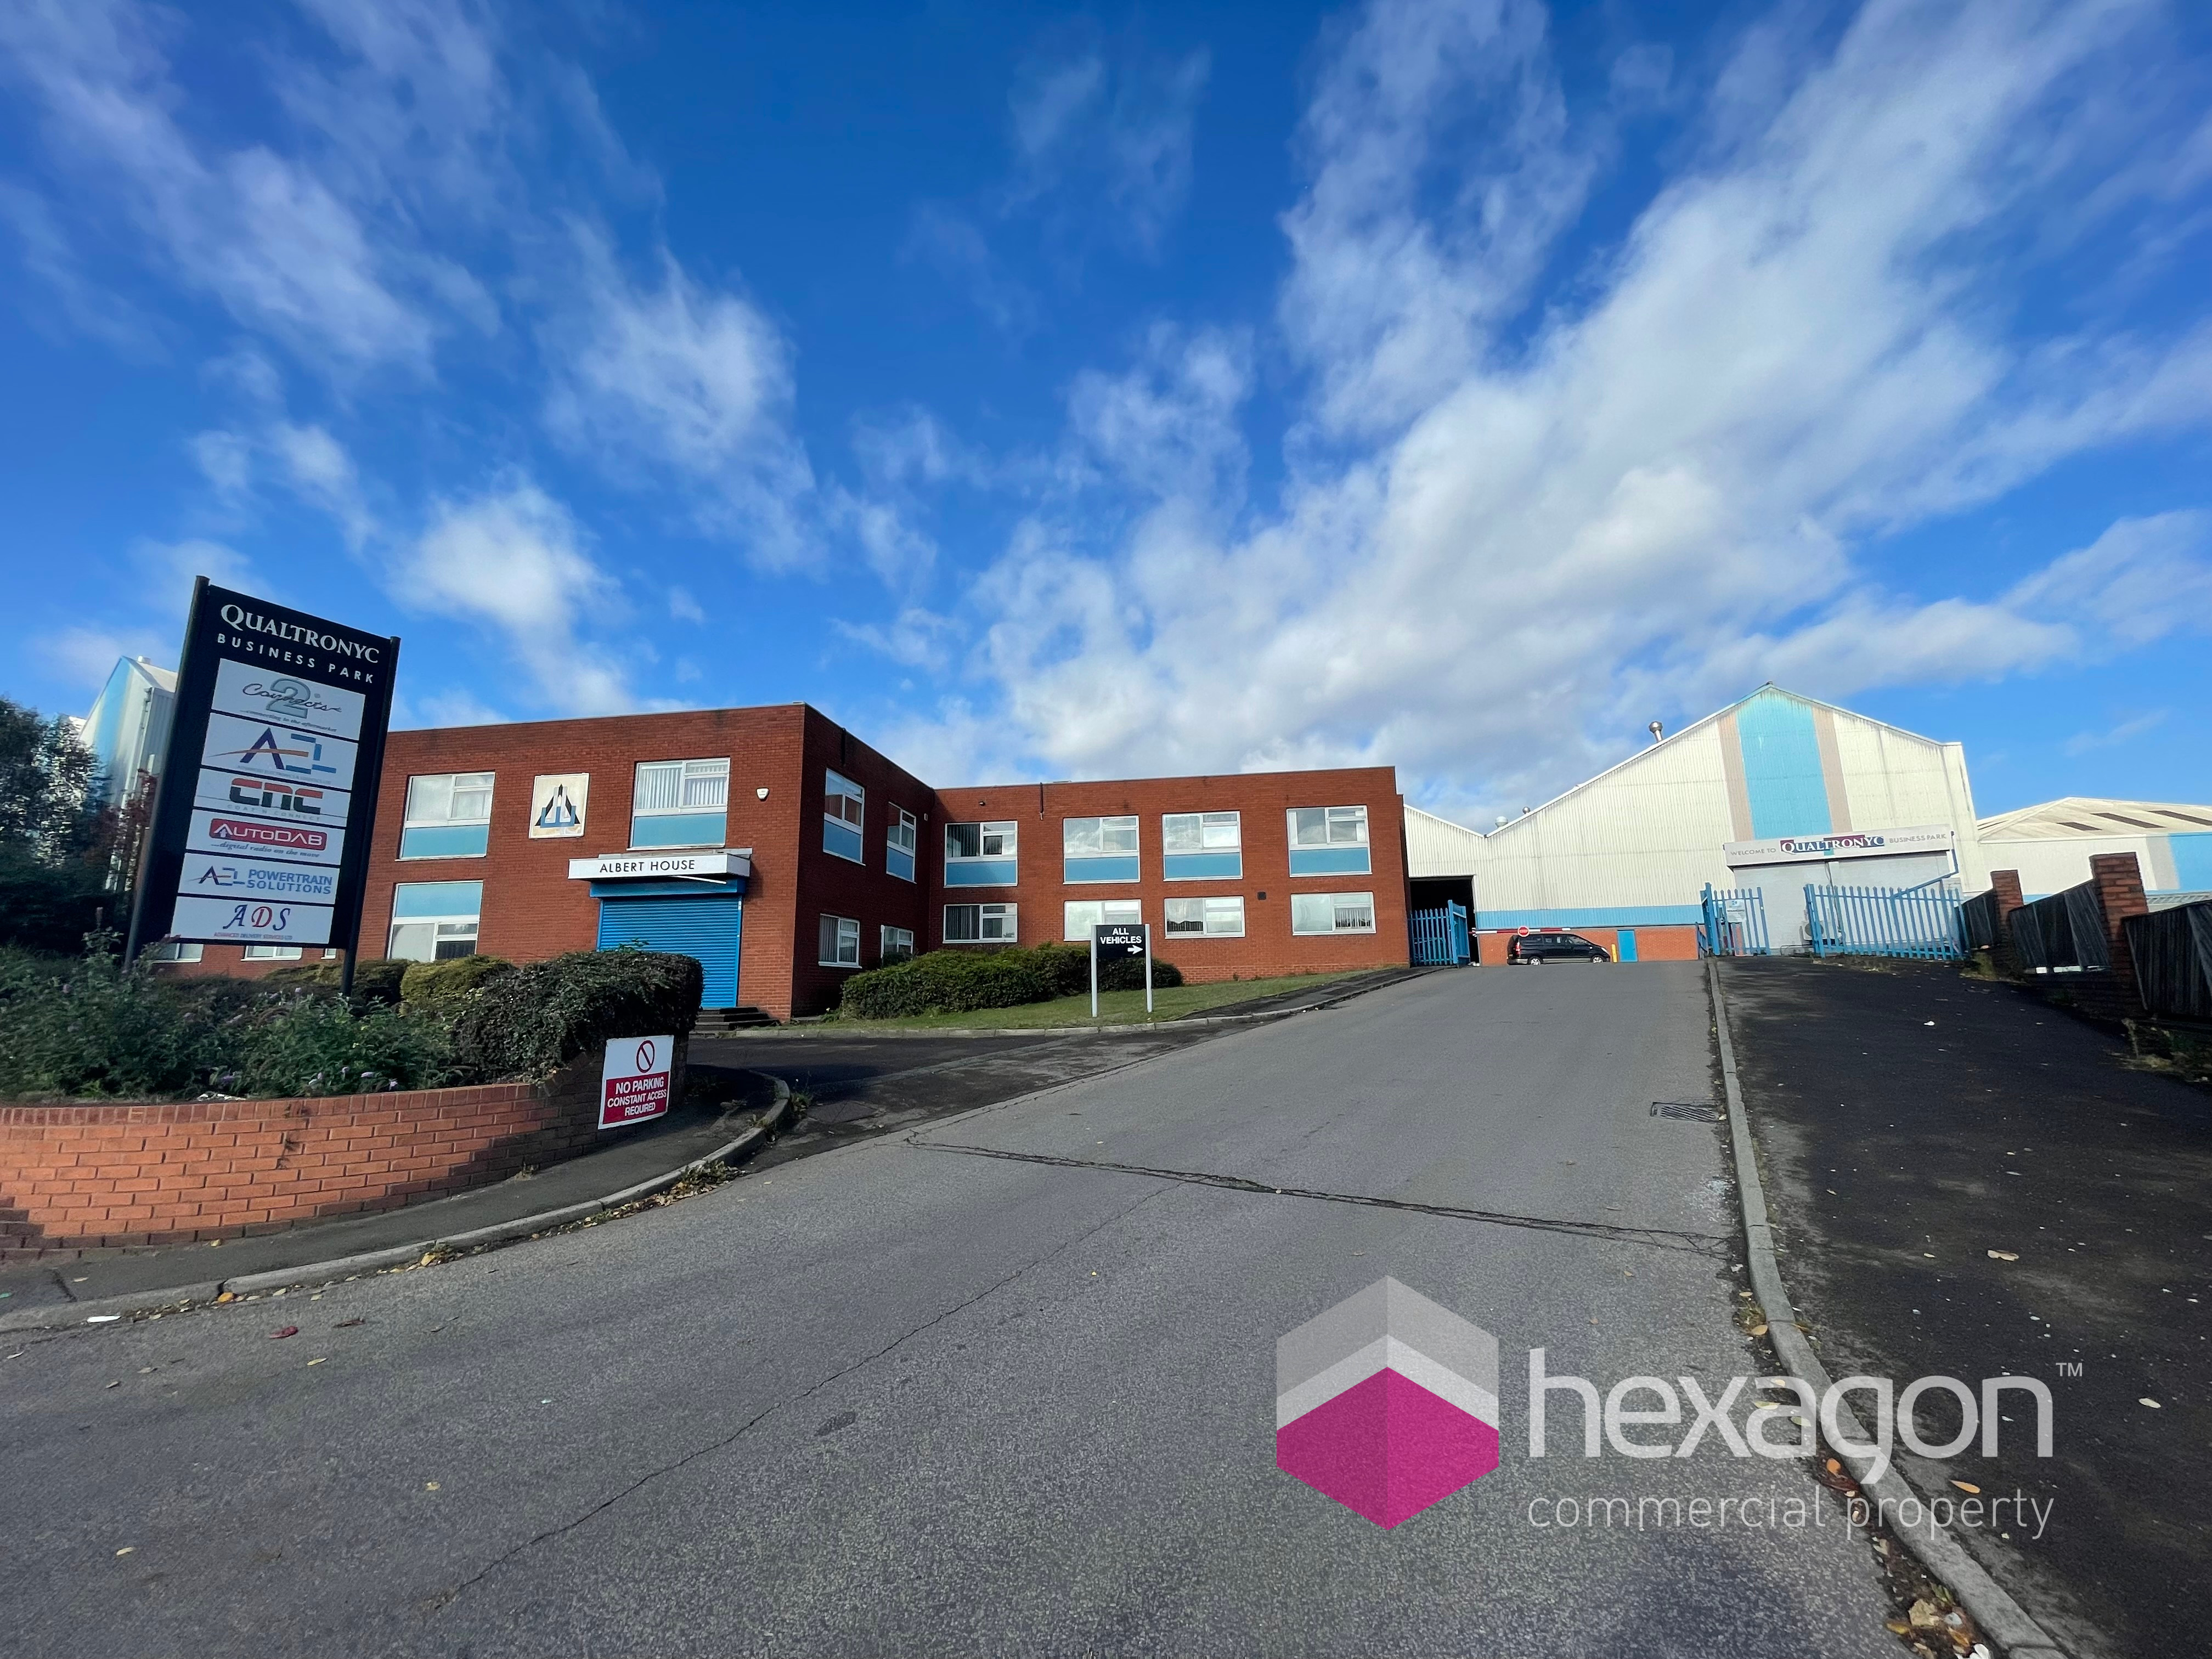 0 bed Land (Commercial) for rent in Tipton. From Hexagon Commercial Property